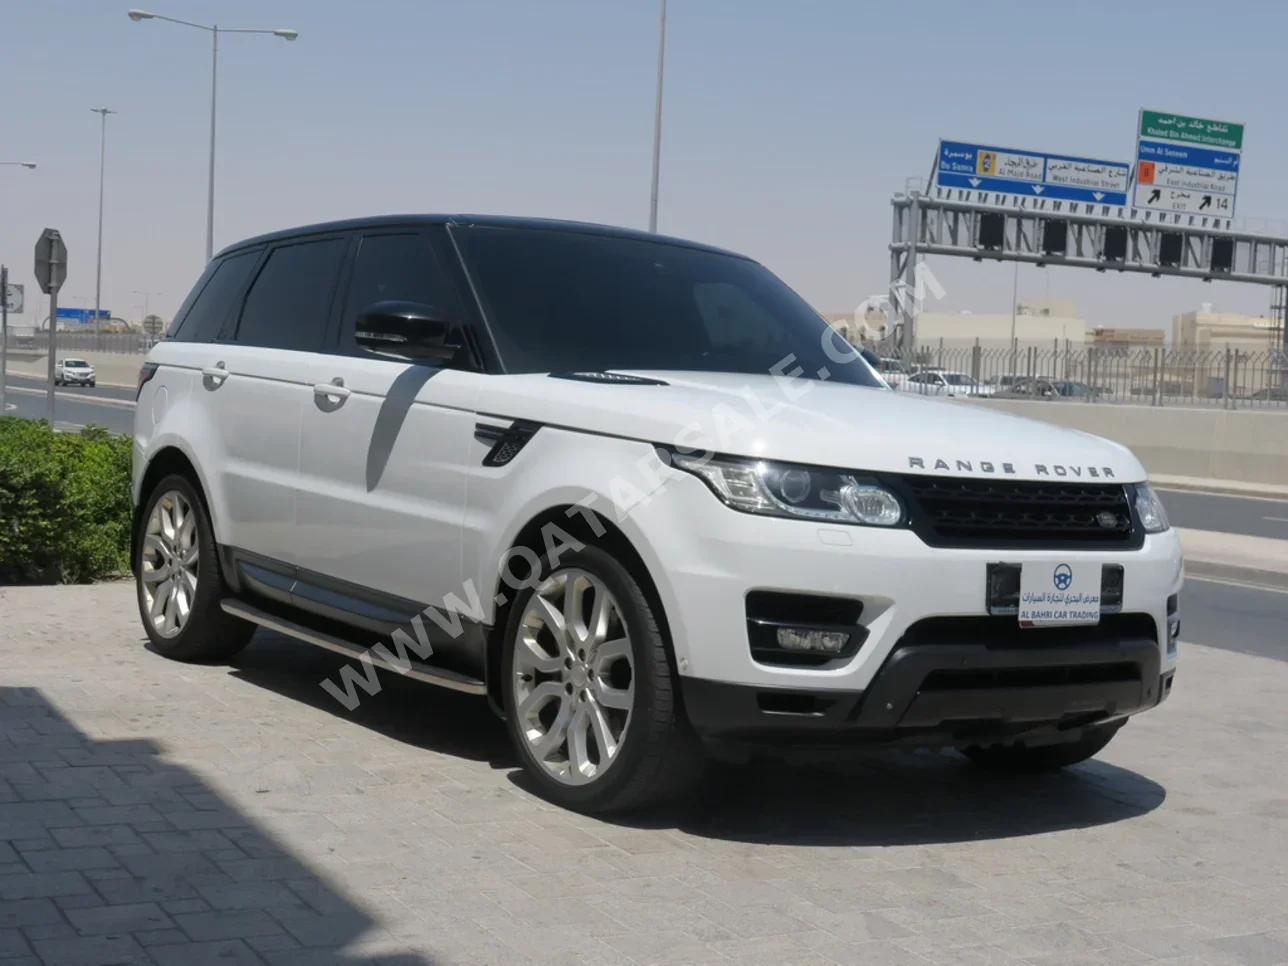 Land Rover  Range Rover  Sport Super charged  2015  Automatic  159,000 Km  8 Cylinder  Four Wheel Drive (4WD)  SUV  White